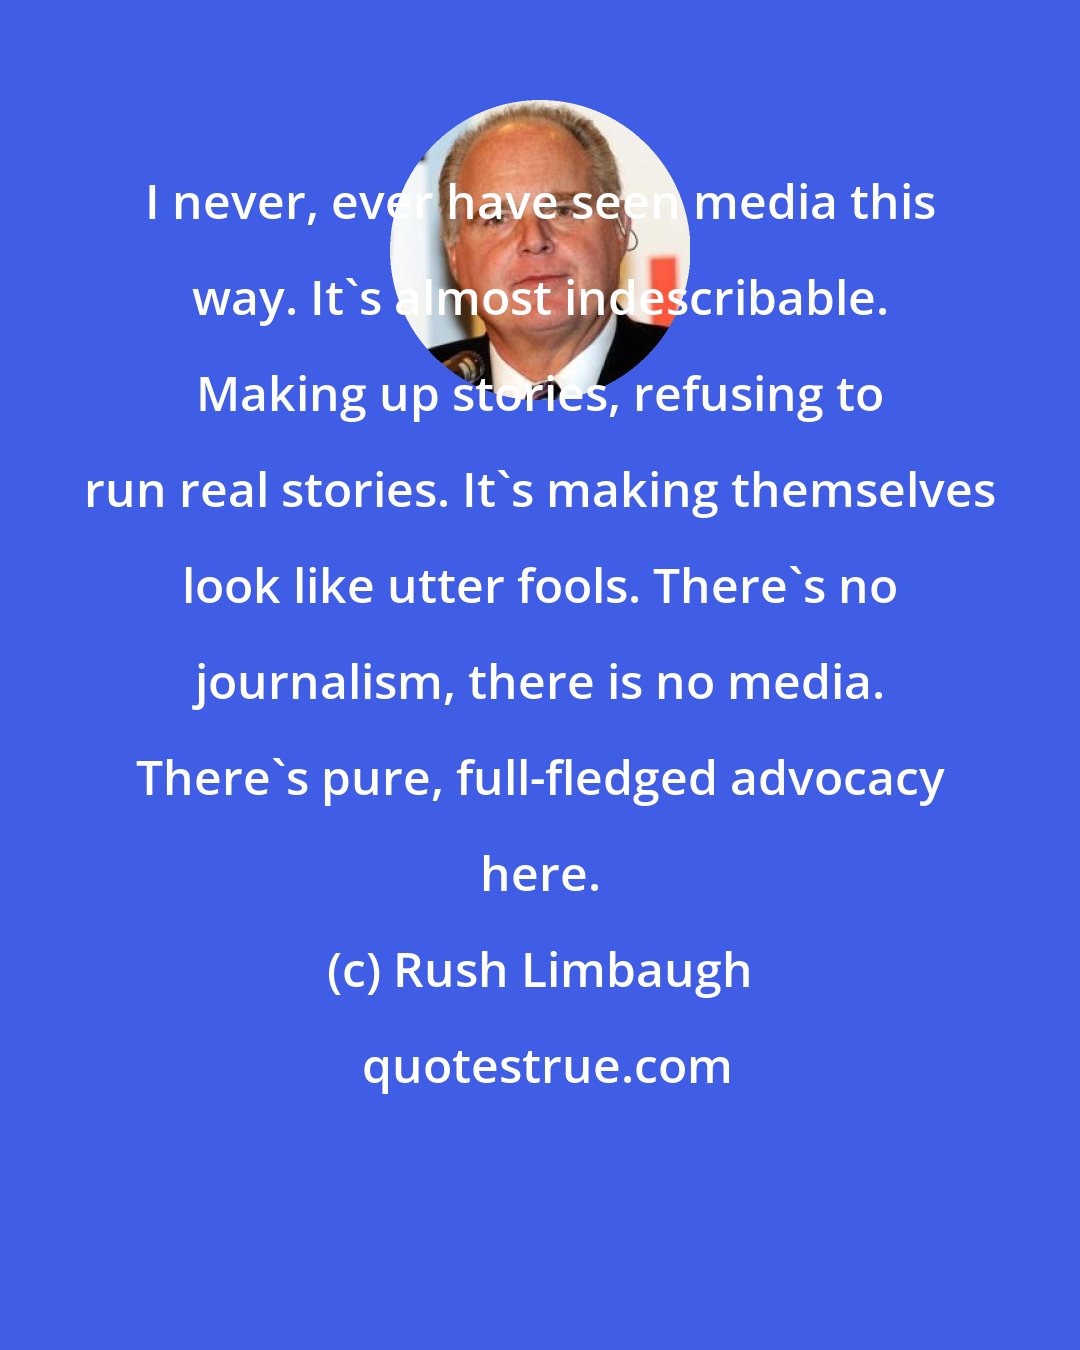 Rush Limbaugh: I never, ever have seen media this way. It's almost indescribable. Making up stories, refusing to run real stories. It's making themselves look like utter fools. There's no journalism, there is no media. There's pure, full-fledged advocacy here.